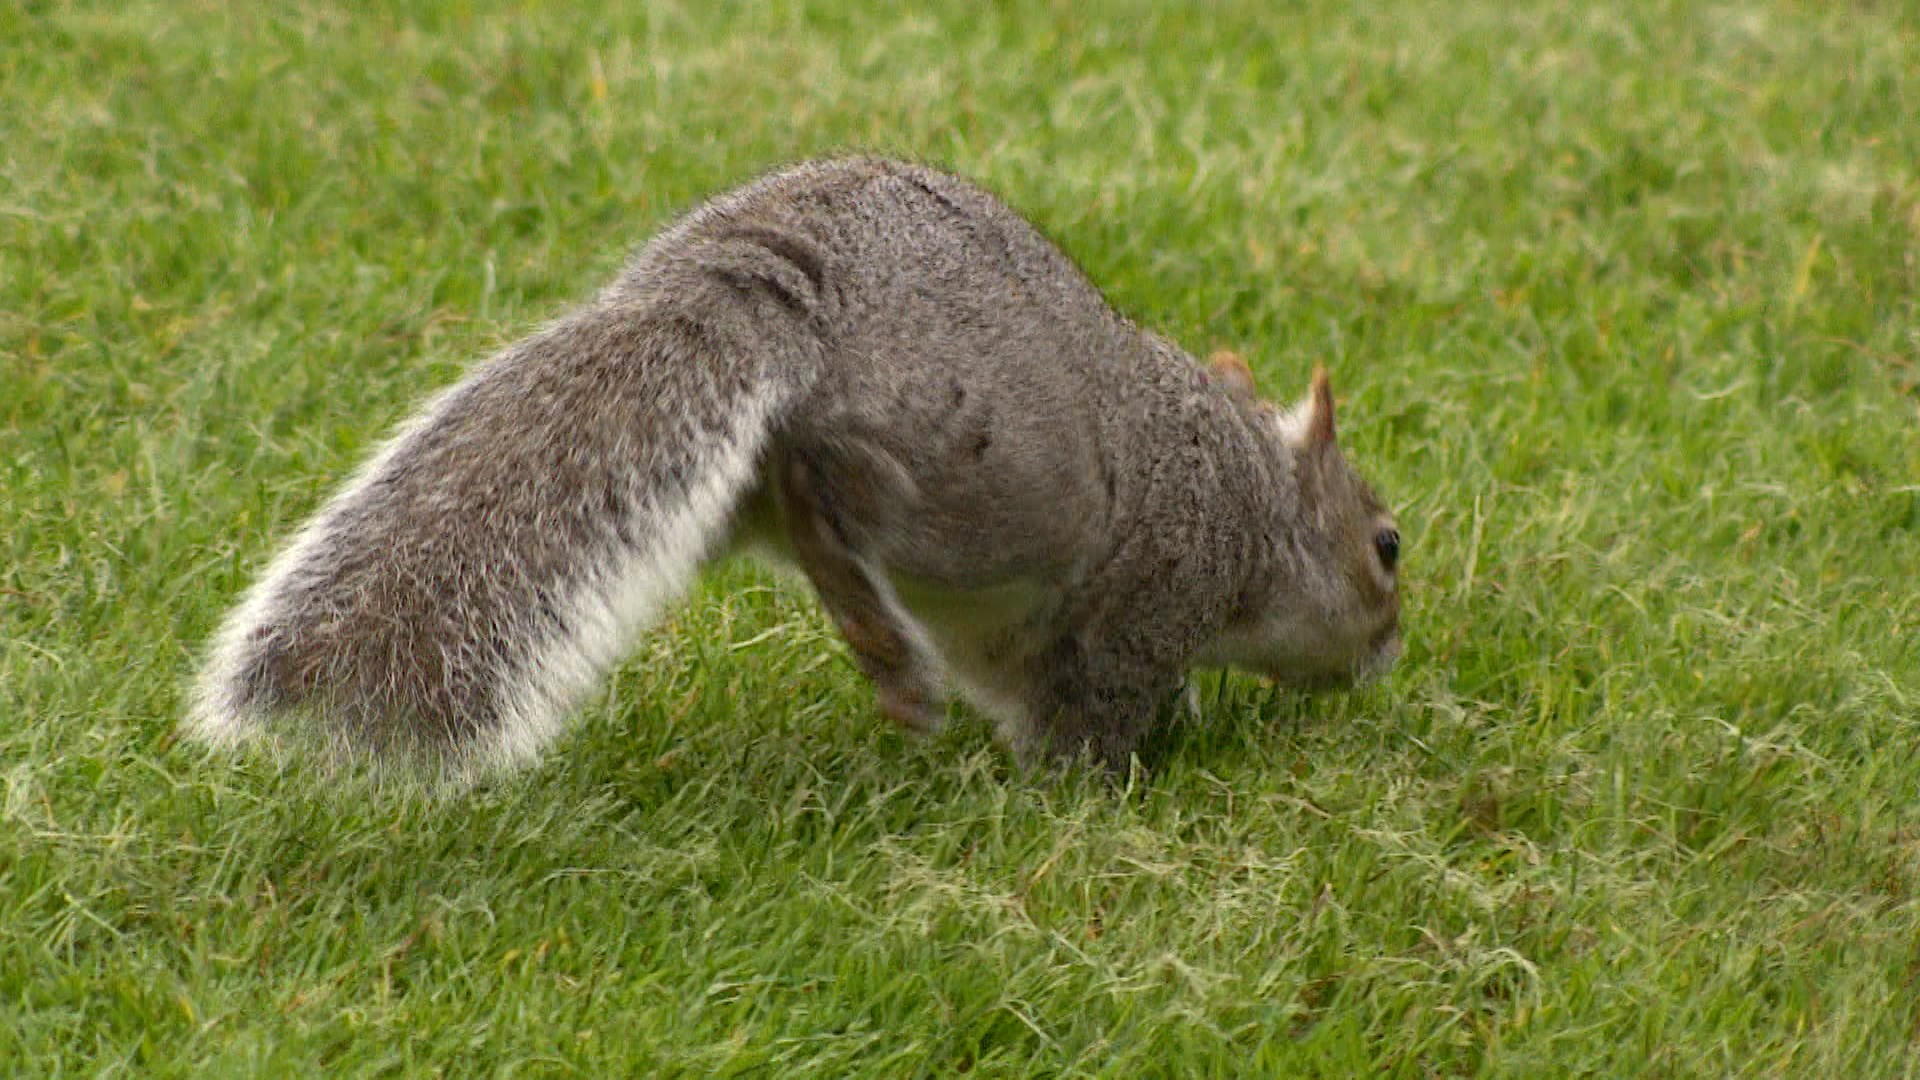 Grey squirrels are less aware of pine martens as a predator